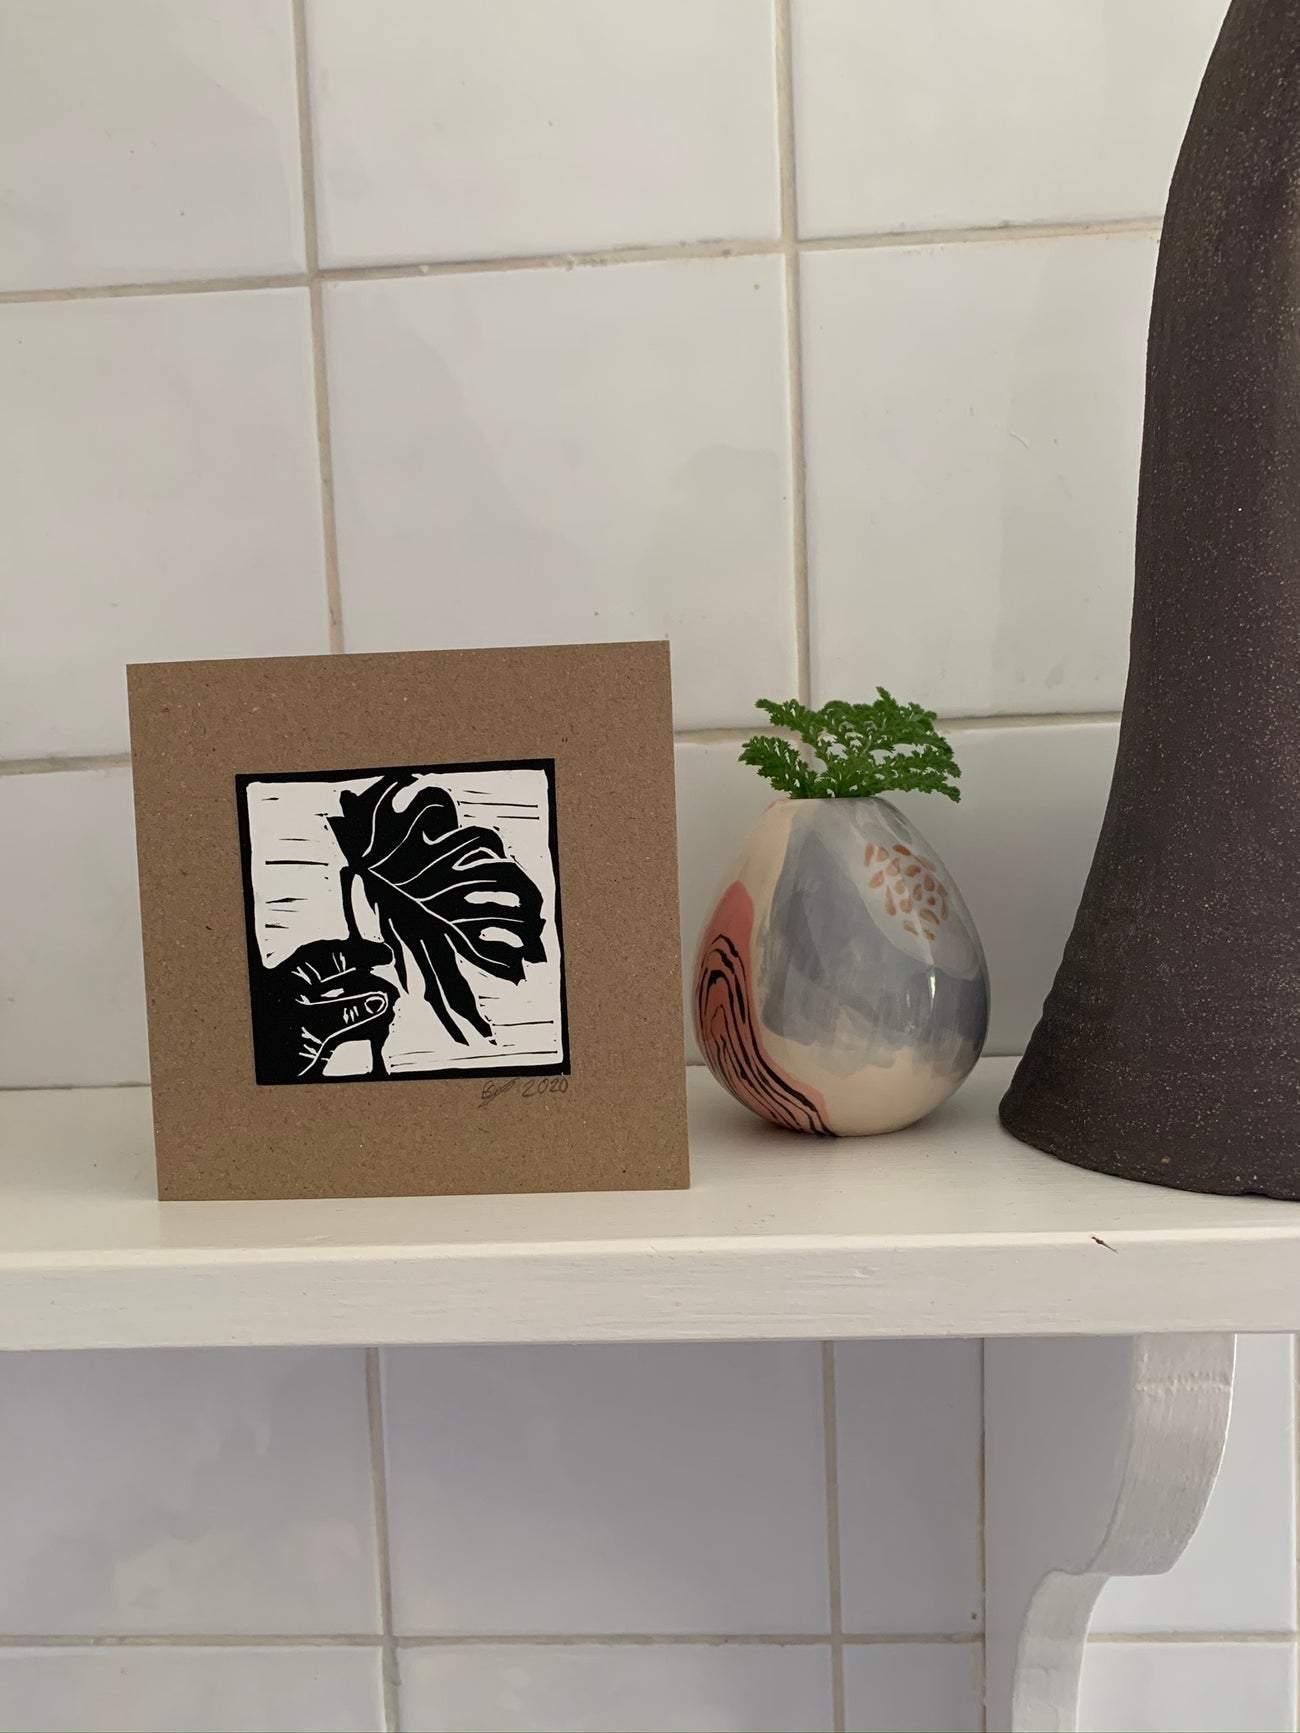 Bouclé cheese plant lino-cut design blank greetings card made in East London & Brighton